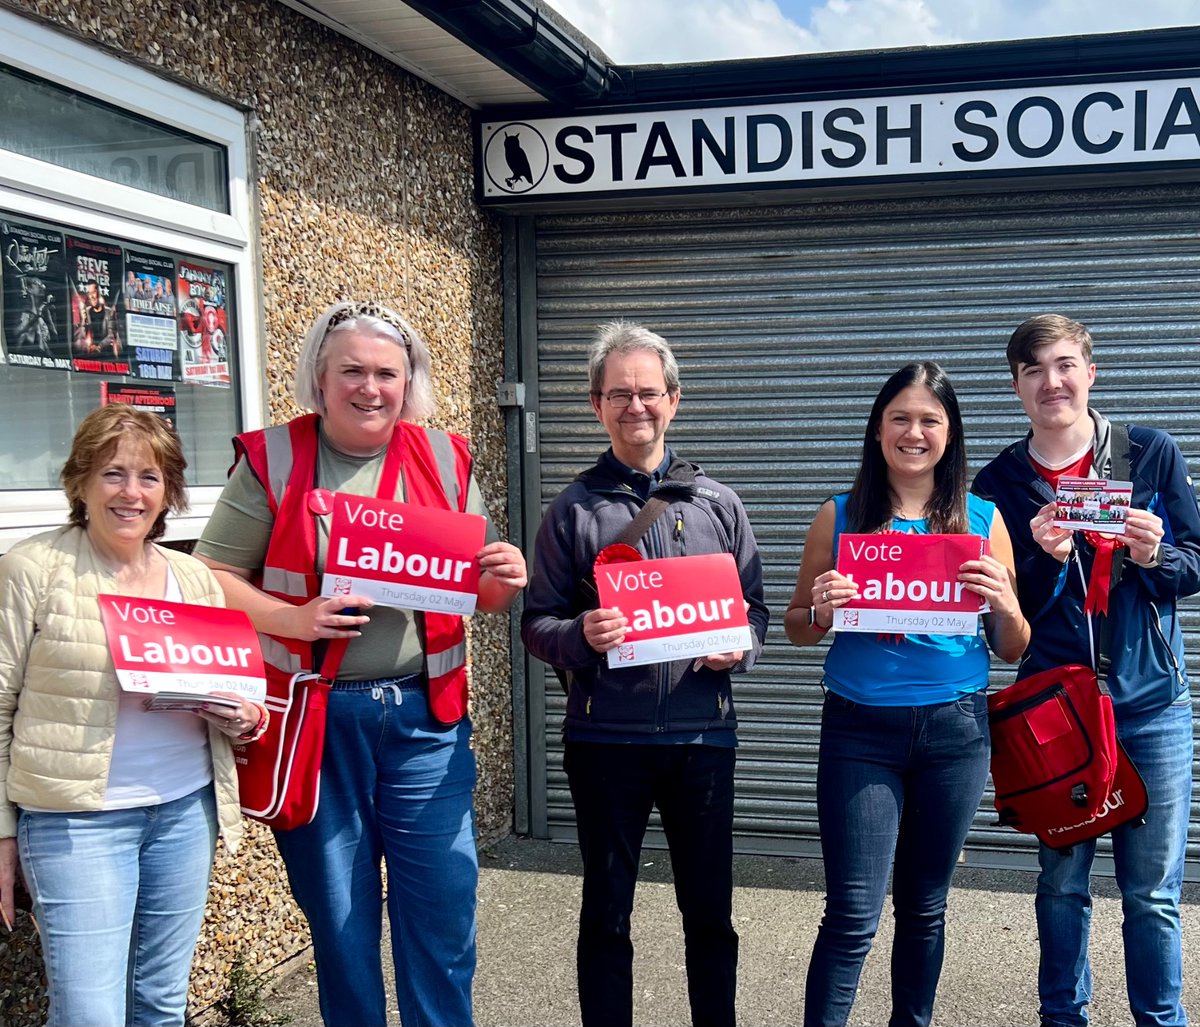 Your Labour team are out across Standish getting out the vote for Councillor Terry Mugan and @andyburnhamGM. Two votes for Labour! 🌹 #VoteLabour